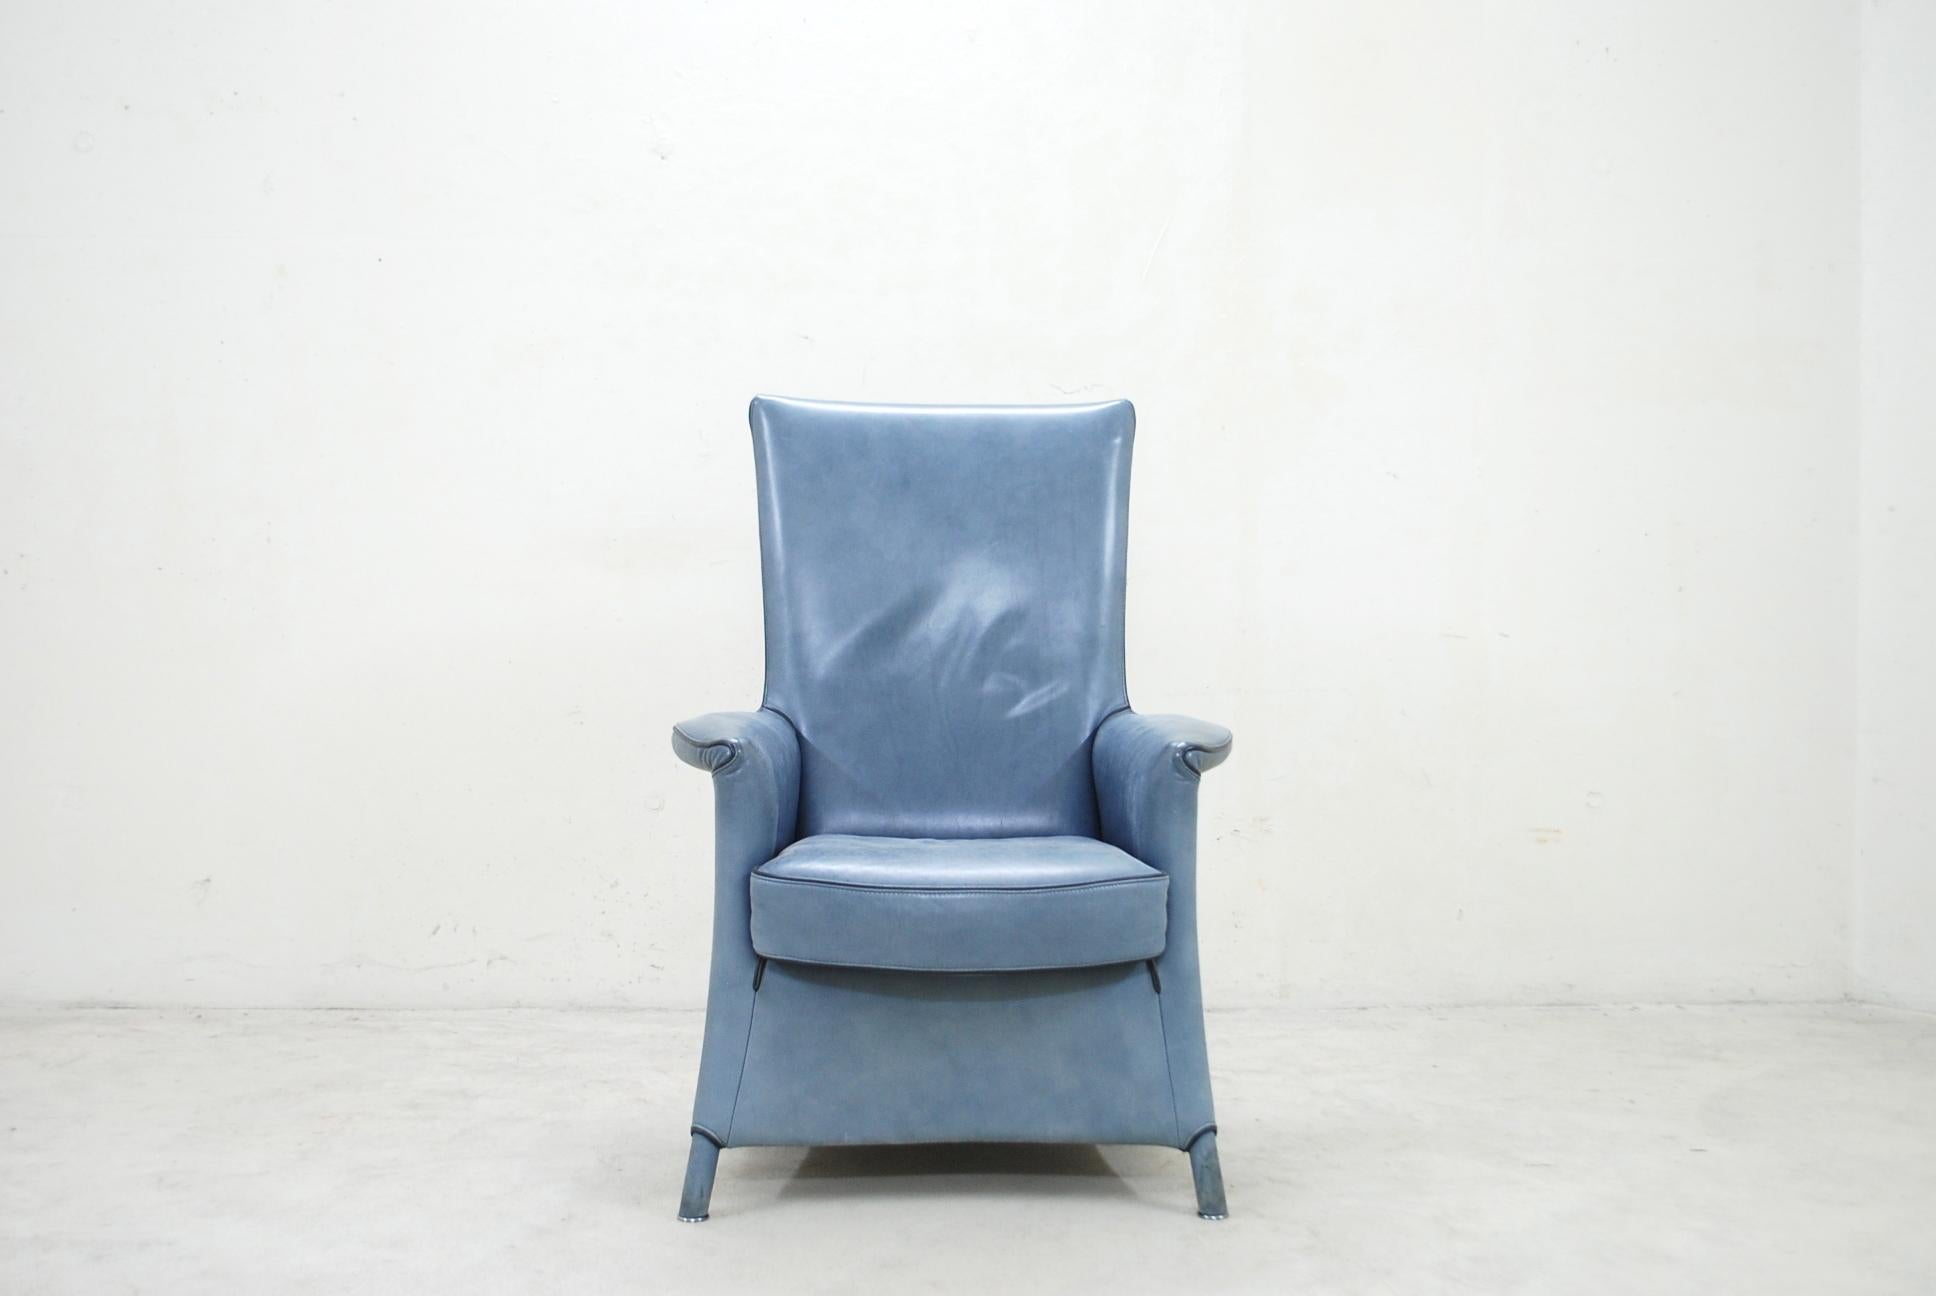 Leather armchair by Austrian - Italian architect Paolo Piva.
Model Alta manufactured by Wittmann.
Blue aniline leather. The design is a basic design from the model aura.
Wittmann is a Austrian company manufacturing high-quality upholstered